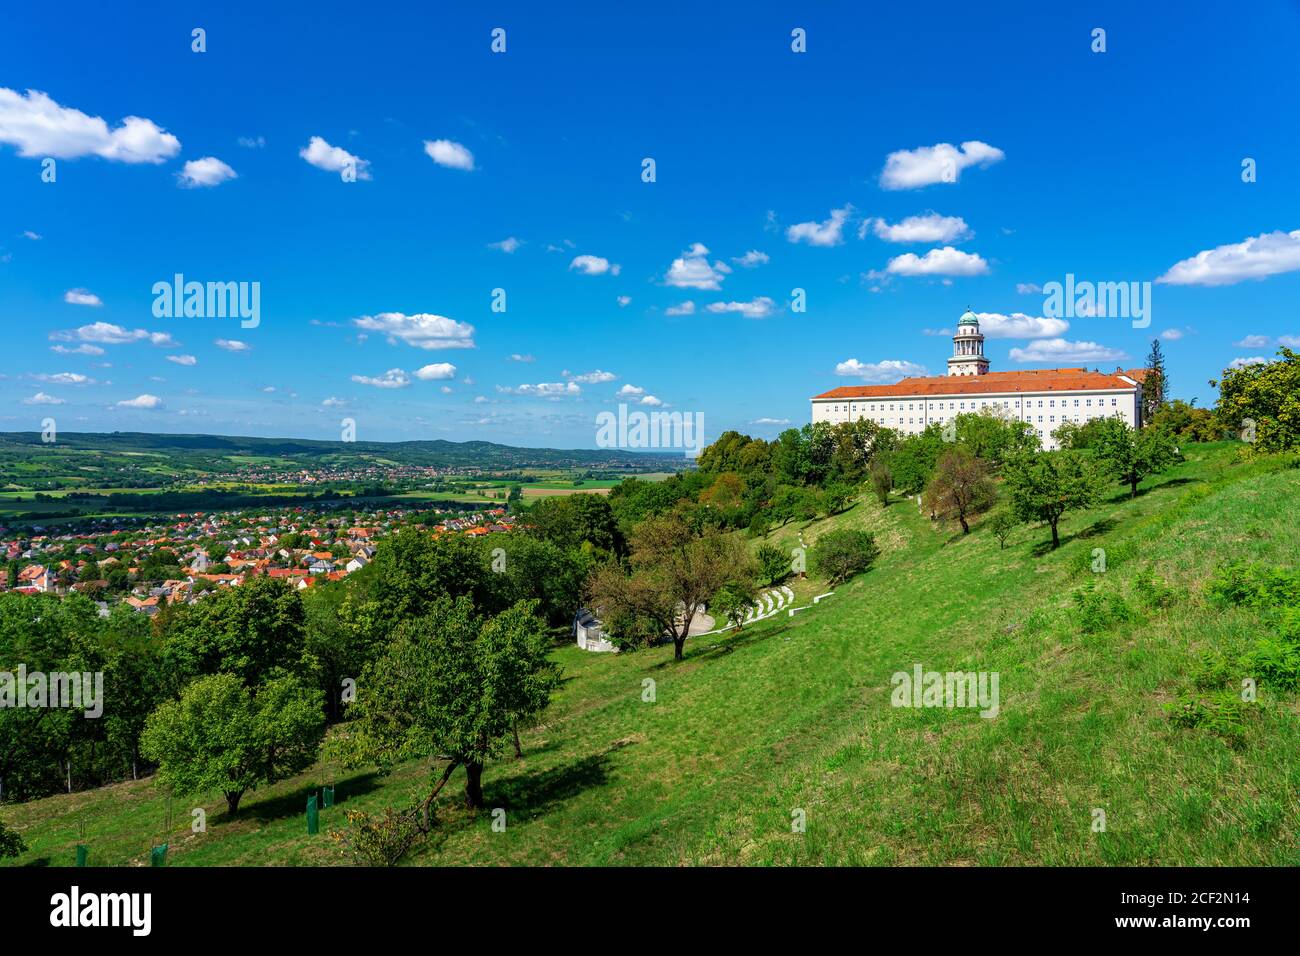 Pannonhalma abbey on the hill with view of the city and nature Stock Photo